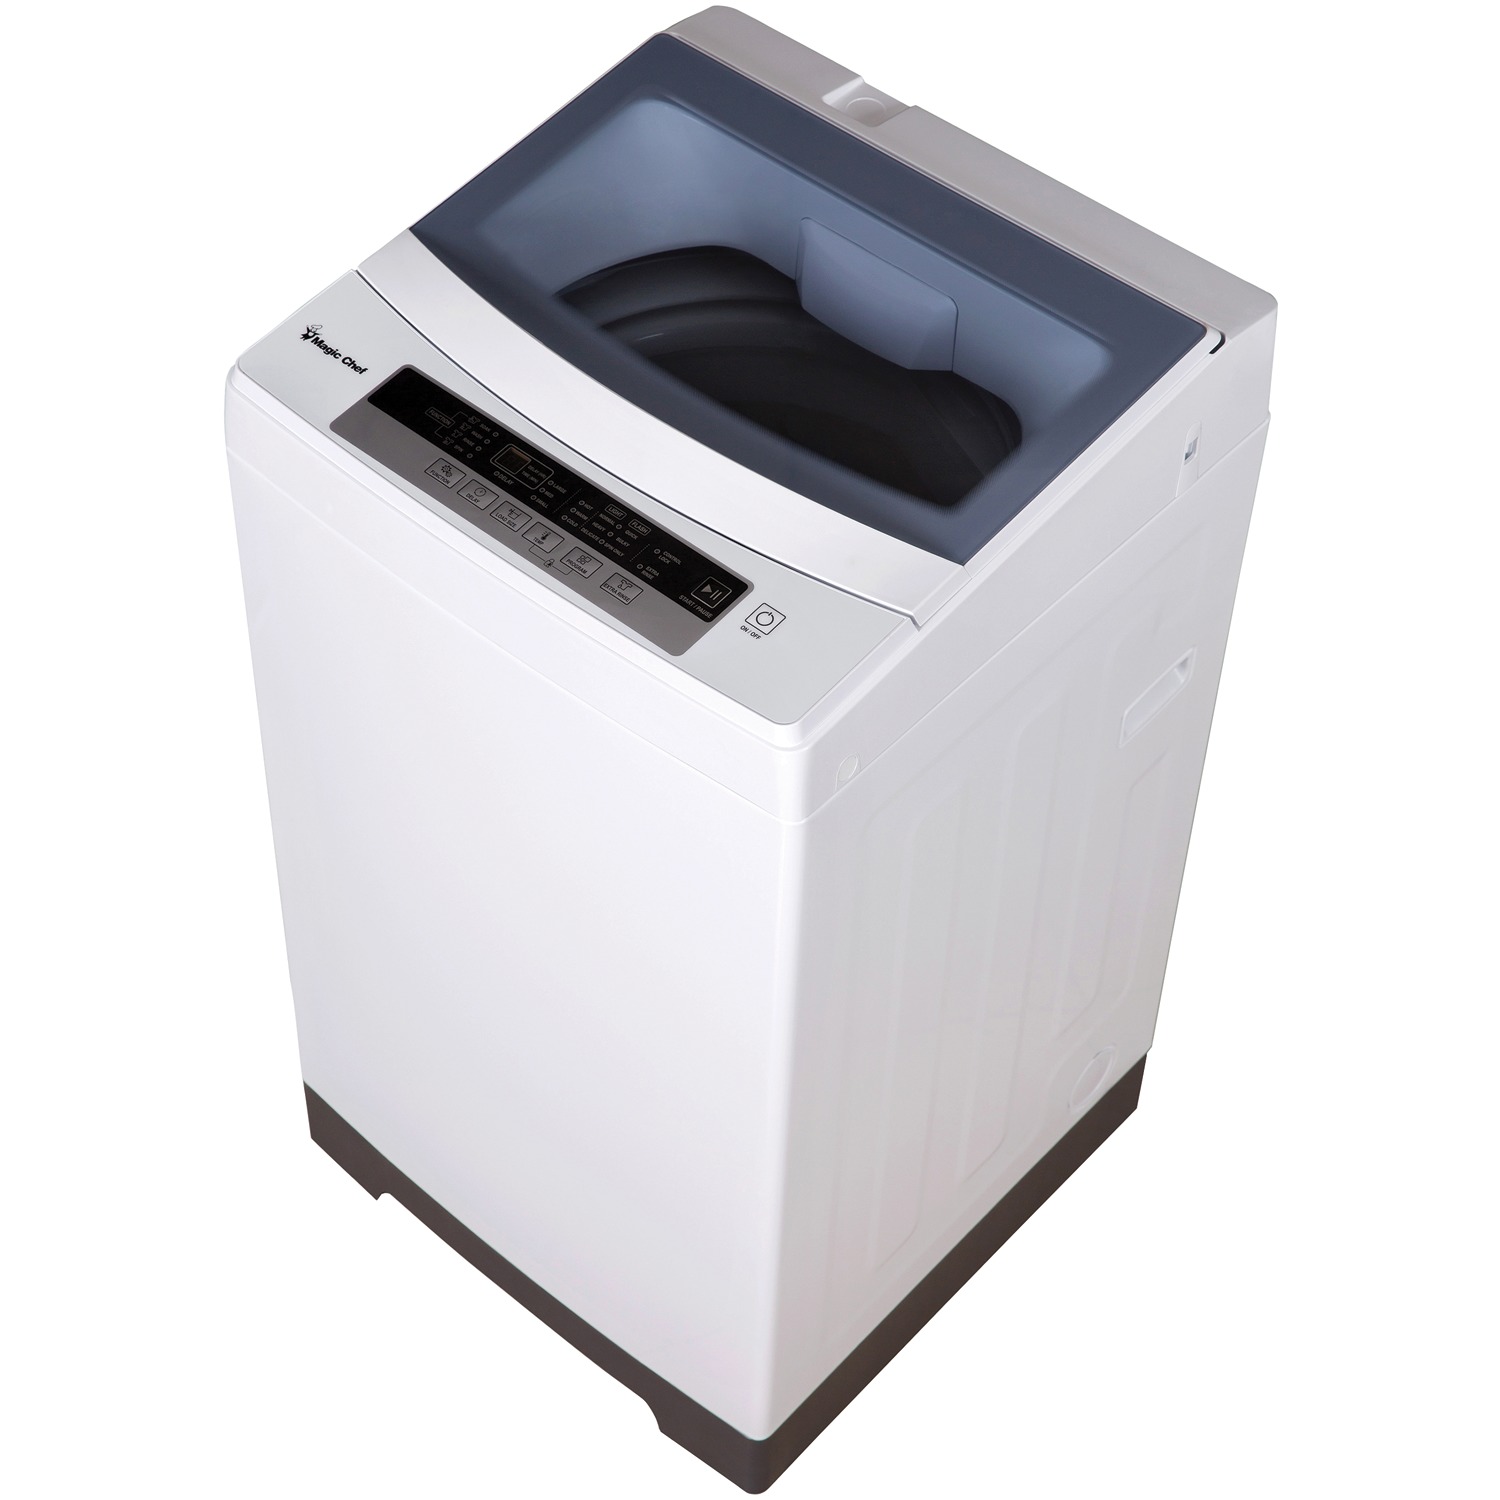 Magic Chef 1.6 cu. ft. Compact Portable Top-Load Washer, White - image 3 of 8